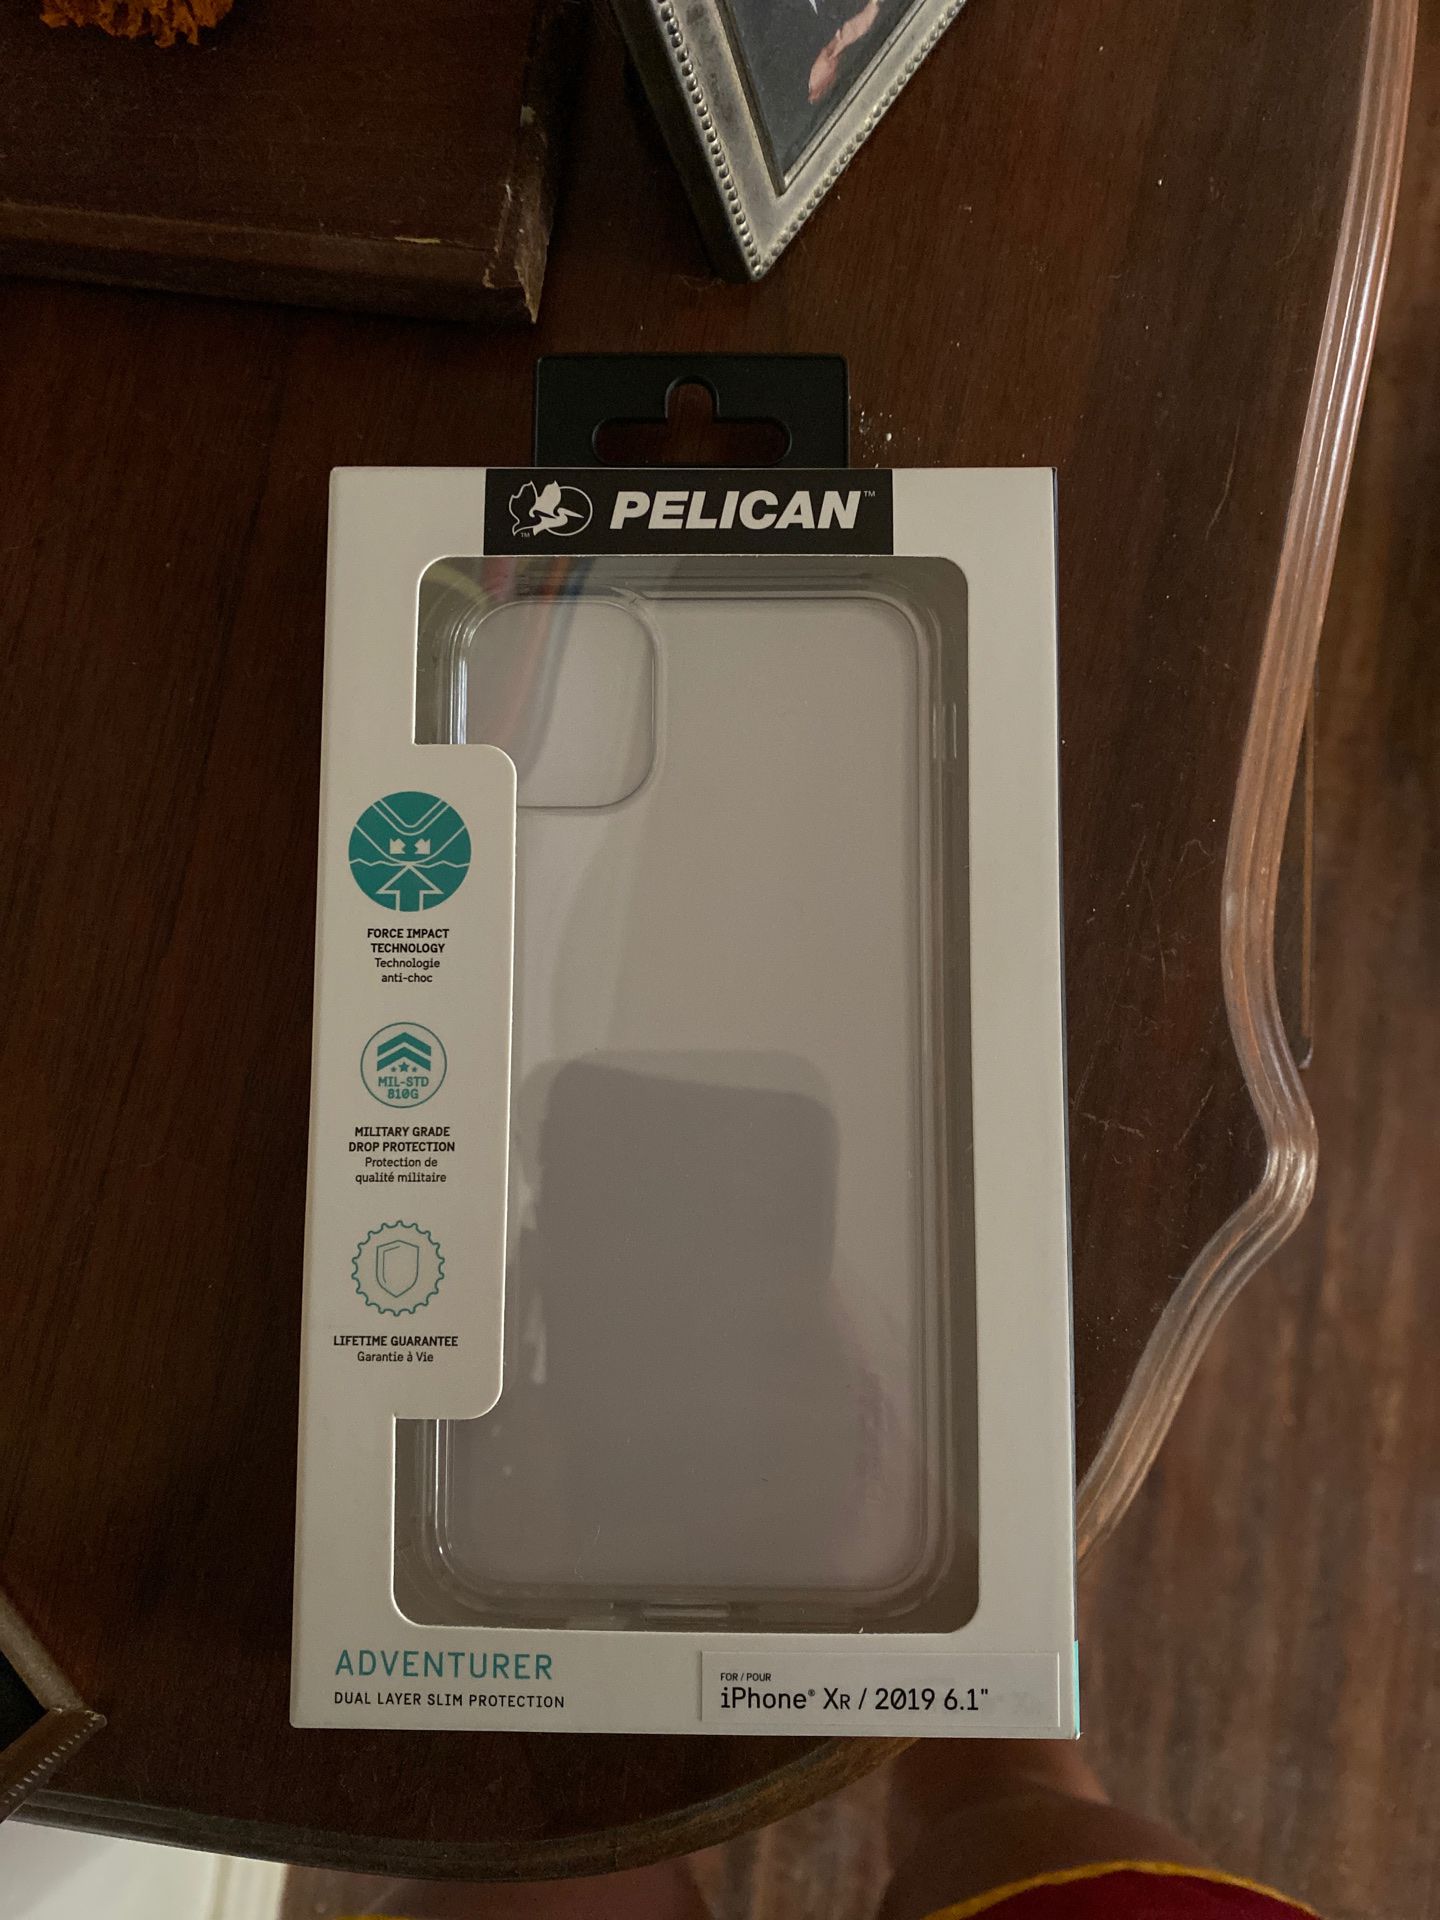 Pelican iPhone adventurer case for 11 and Xr